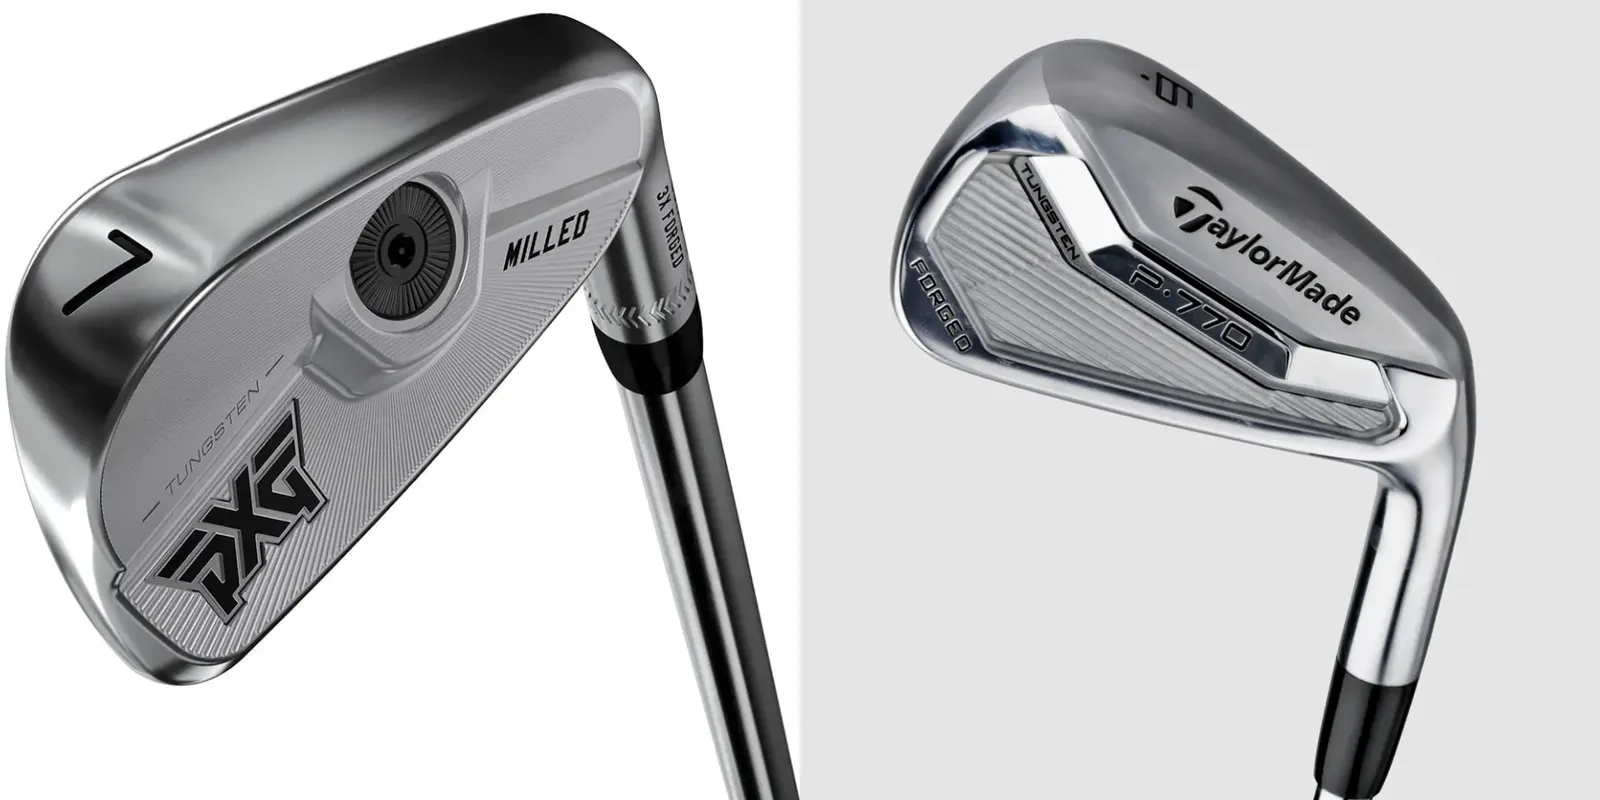 Pxg 0317 T Irons Vs Taylormade P770 Irons: looks